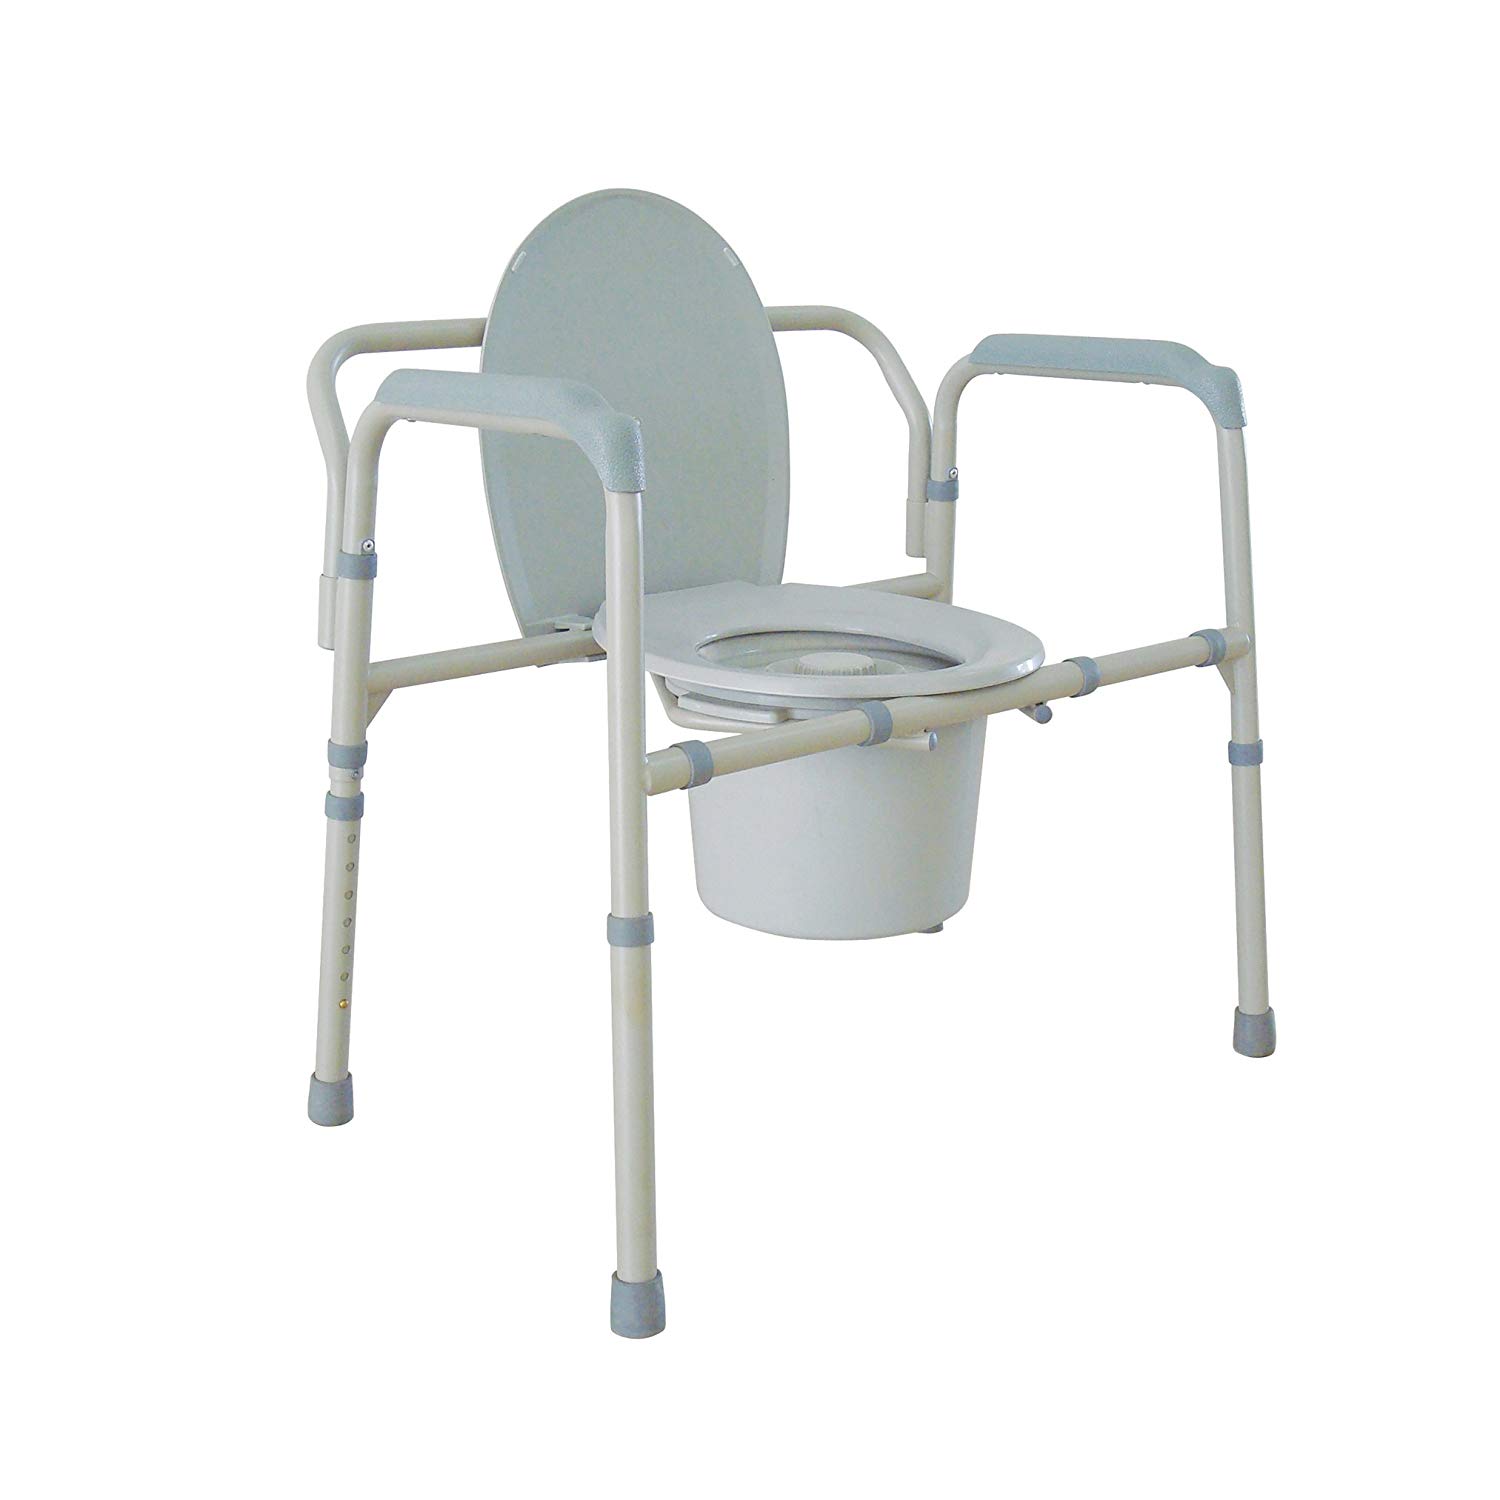 China commode chair, commode toilet chair, bedside commode chair